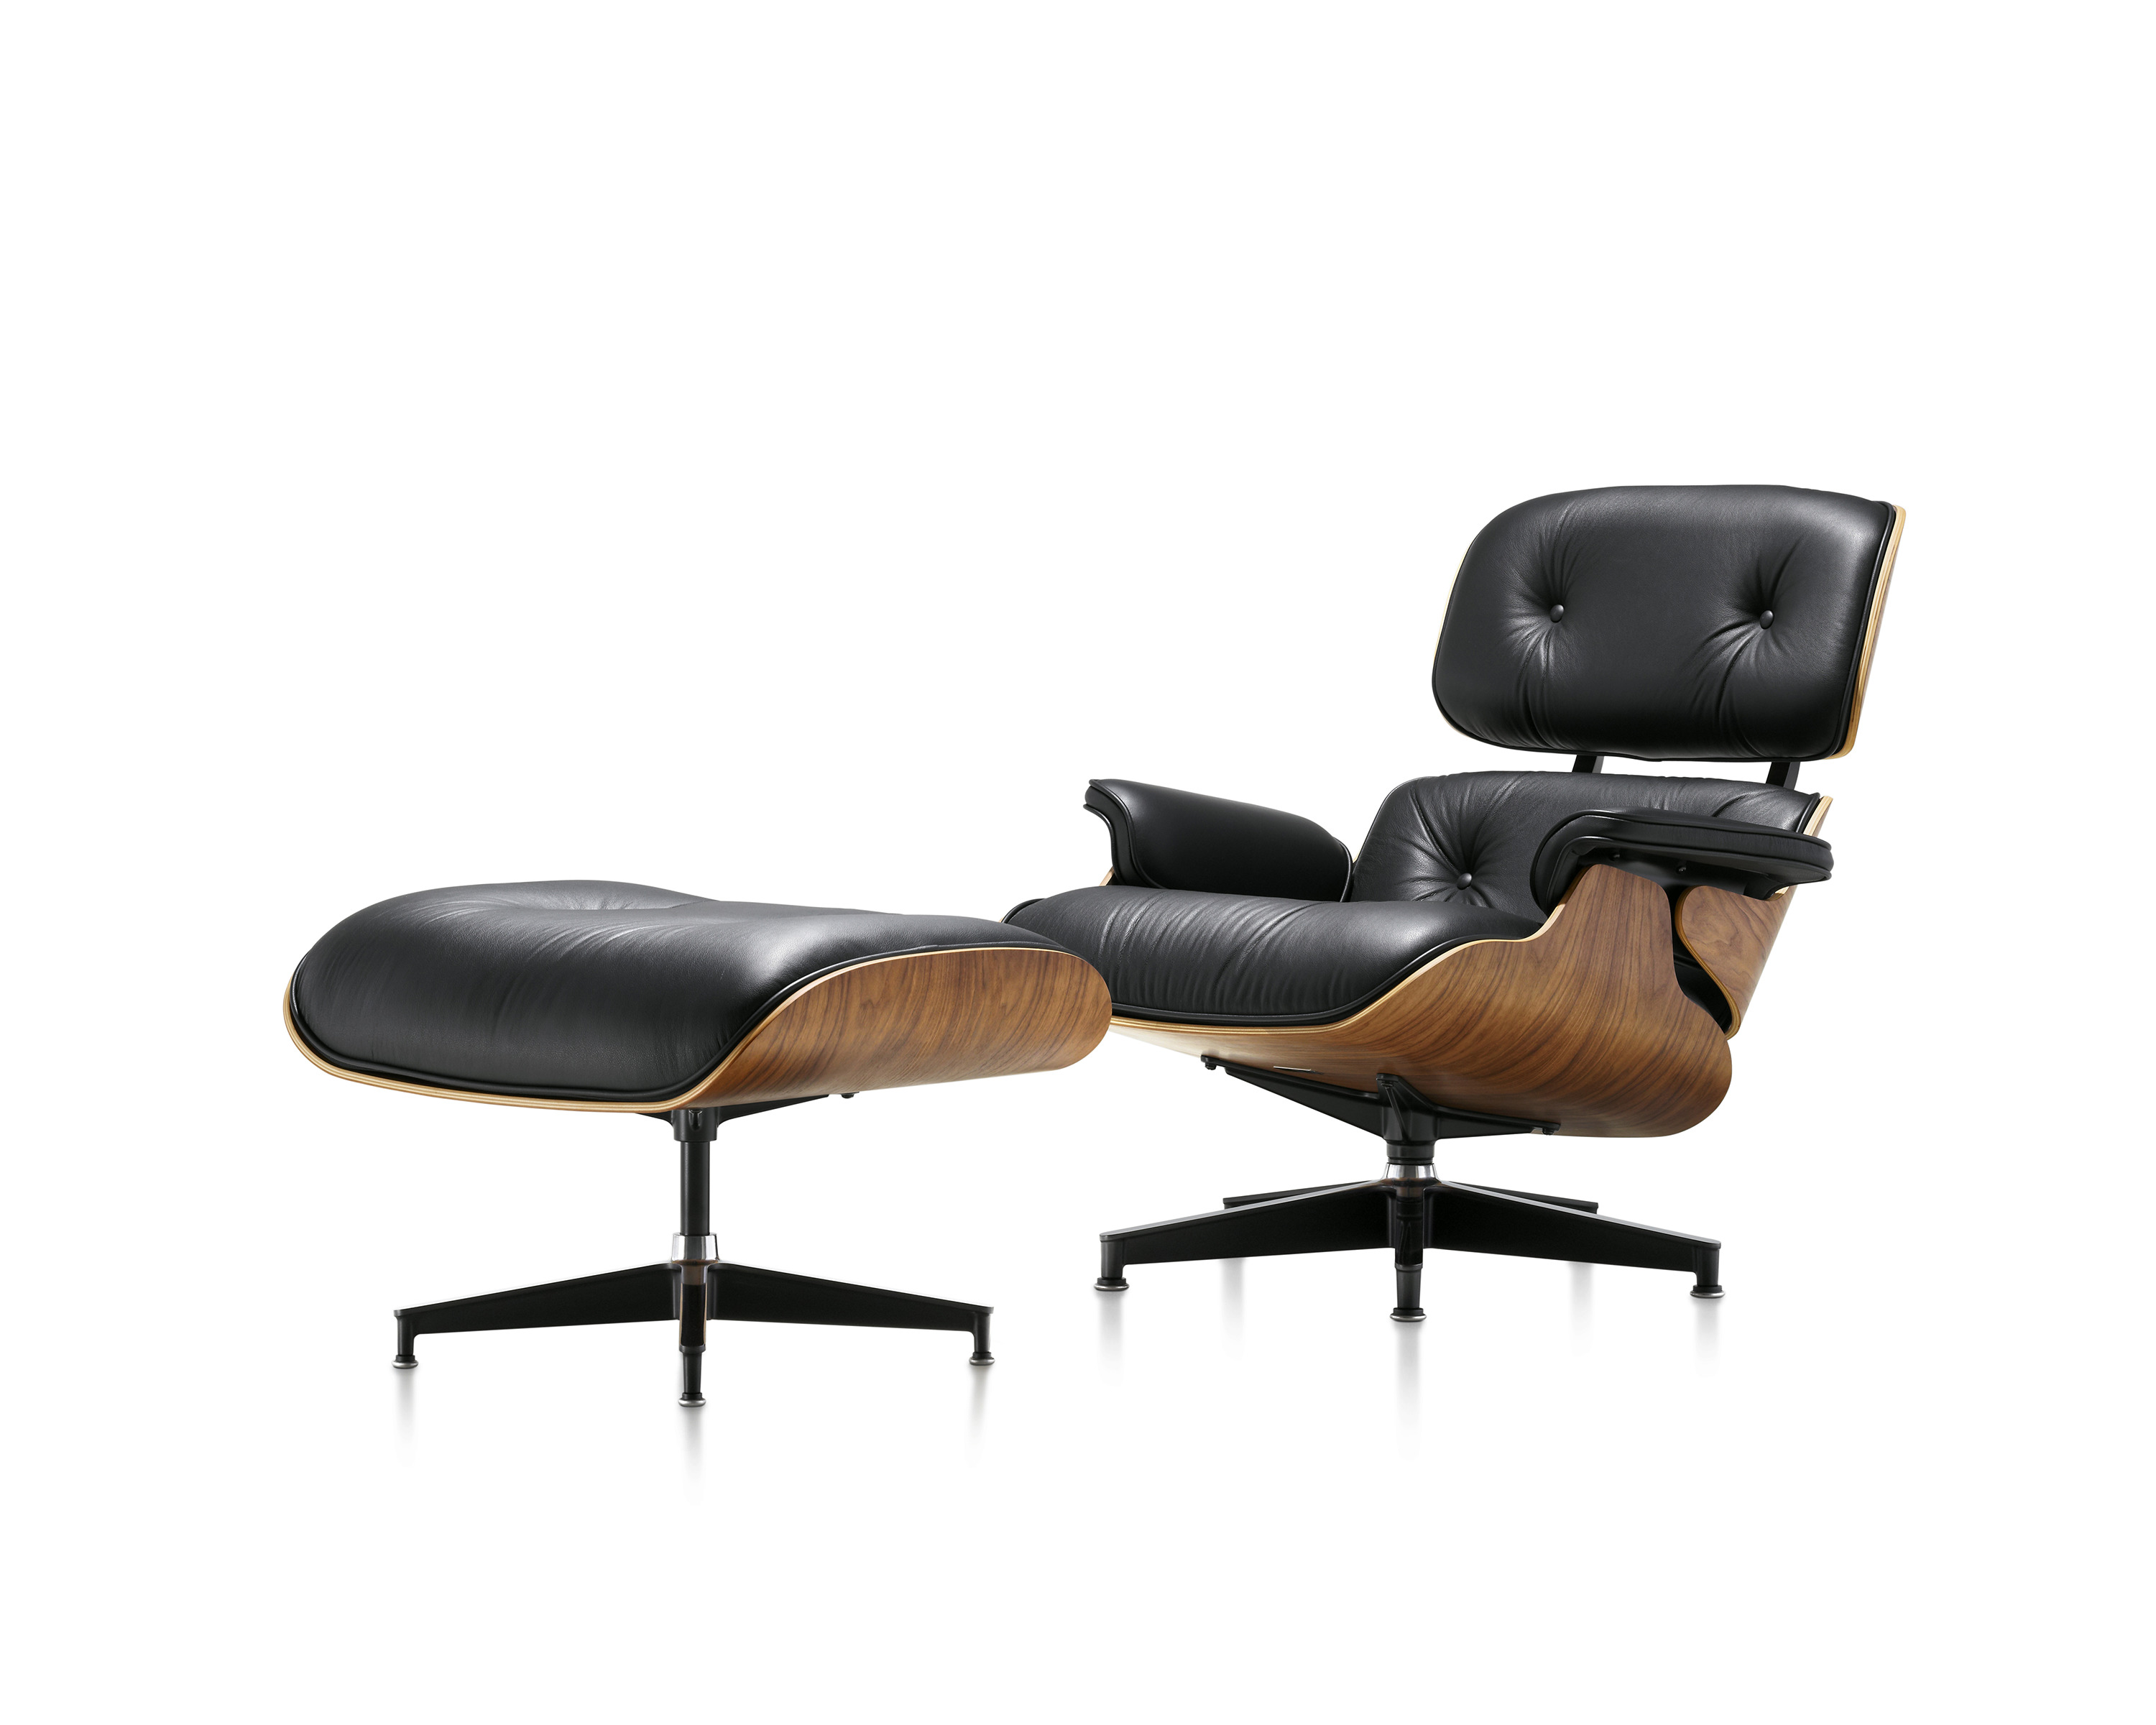 Eames Lounge Chair–Classic - 3D Models - Herman Miller